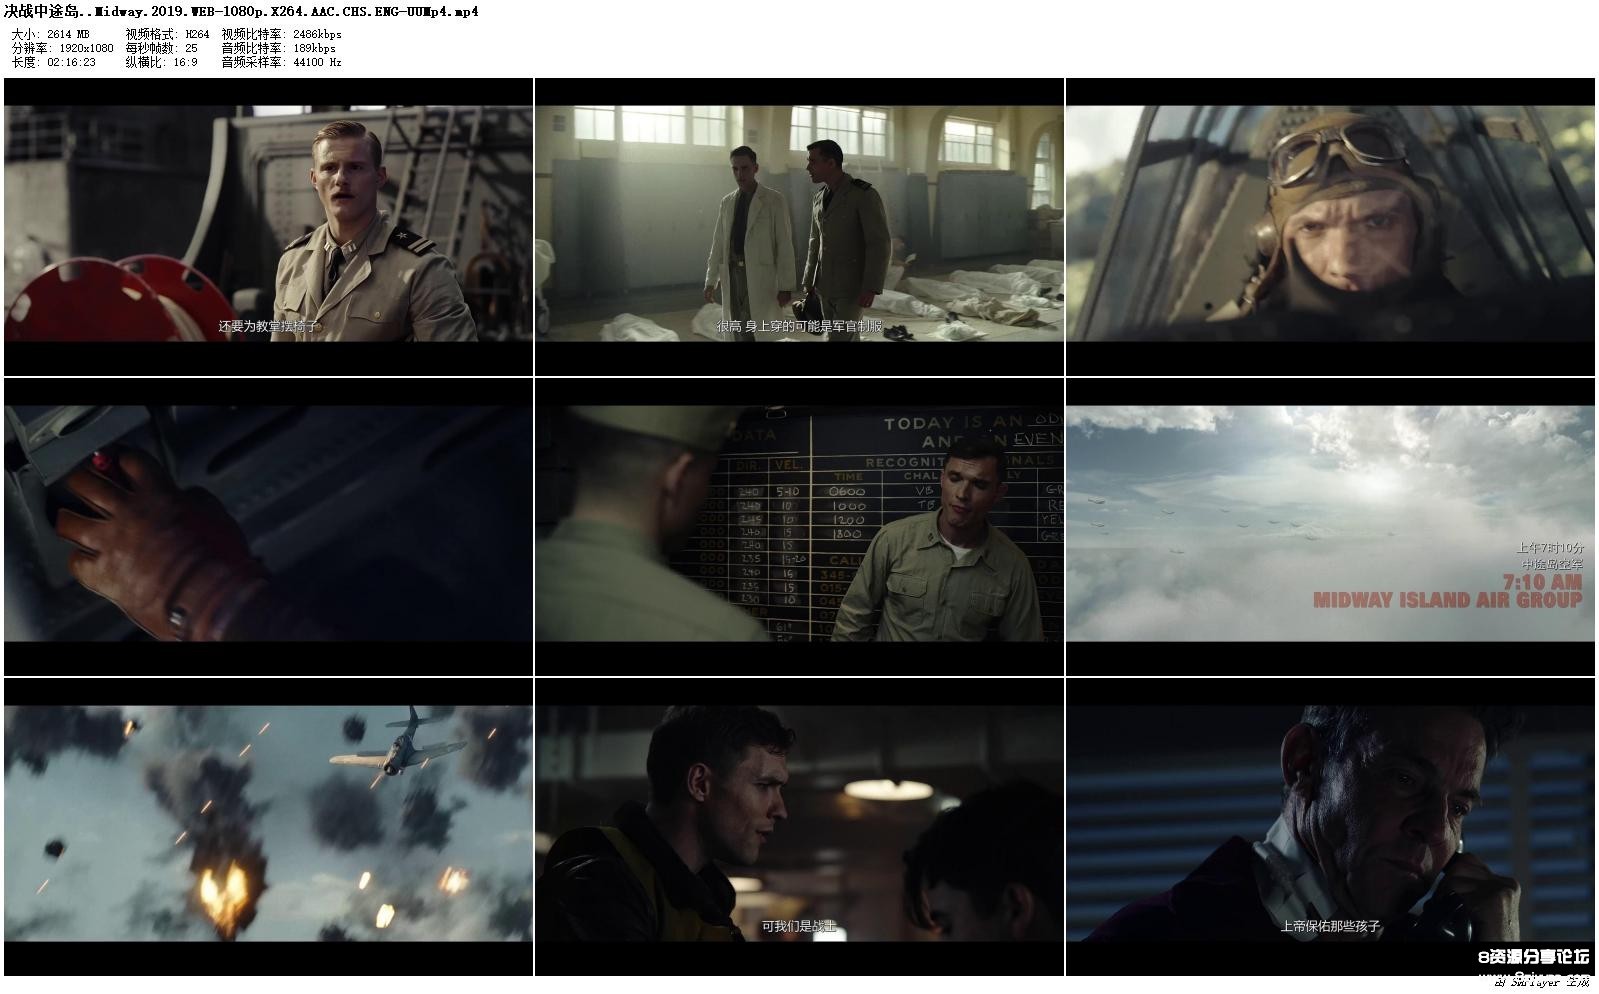 ..Midway.2019.WEB-1080p.X264.AAC.CHS.ENG-UUMp4_preview.jpg